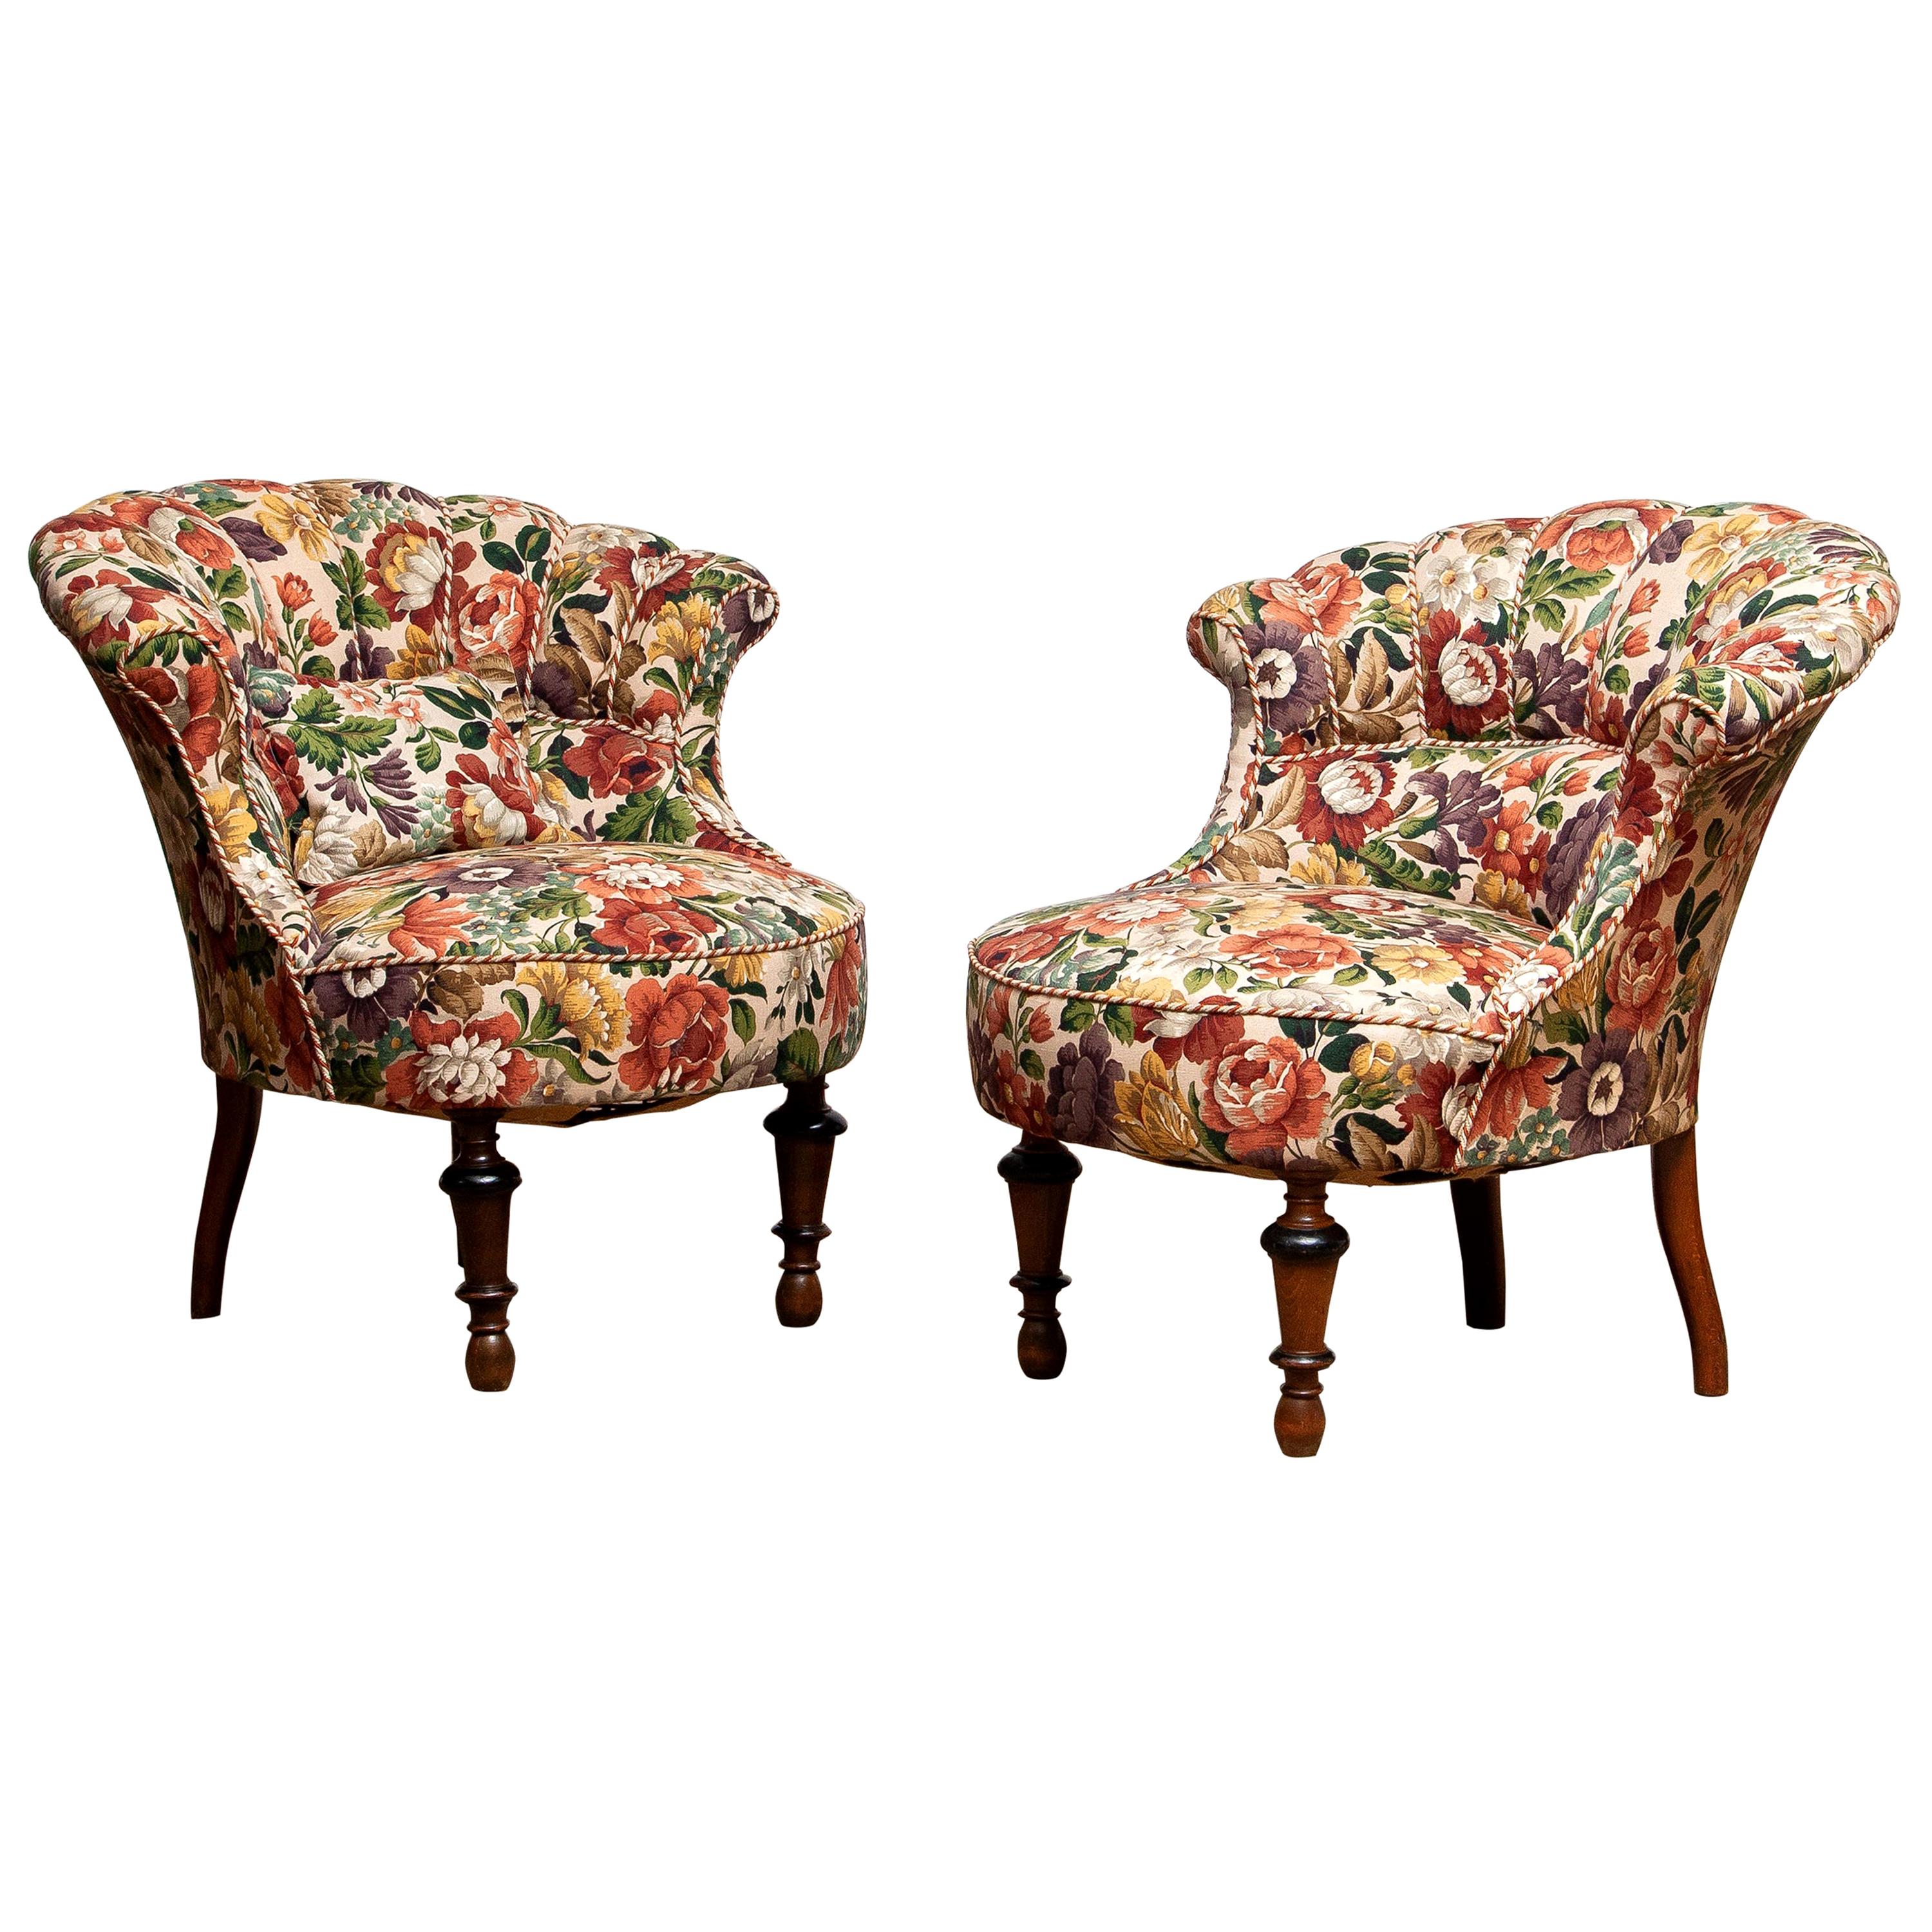 19th Century "Restored" Pair of French Floral Napoleon III Emma / Slipper Chairs